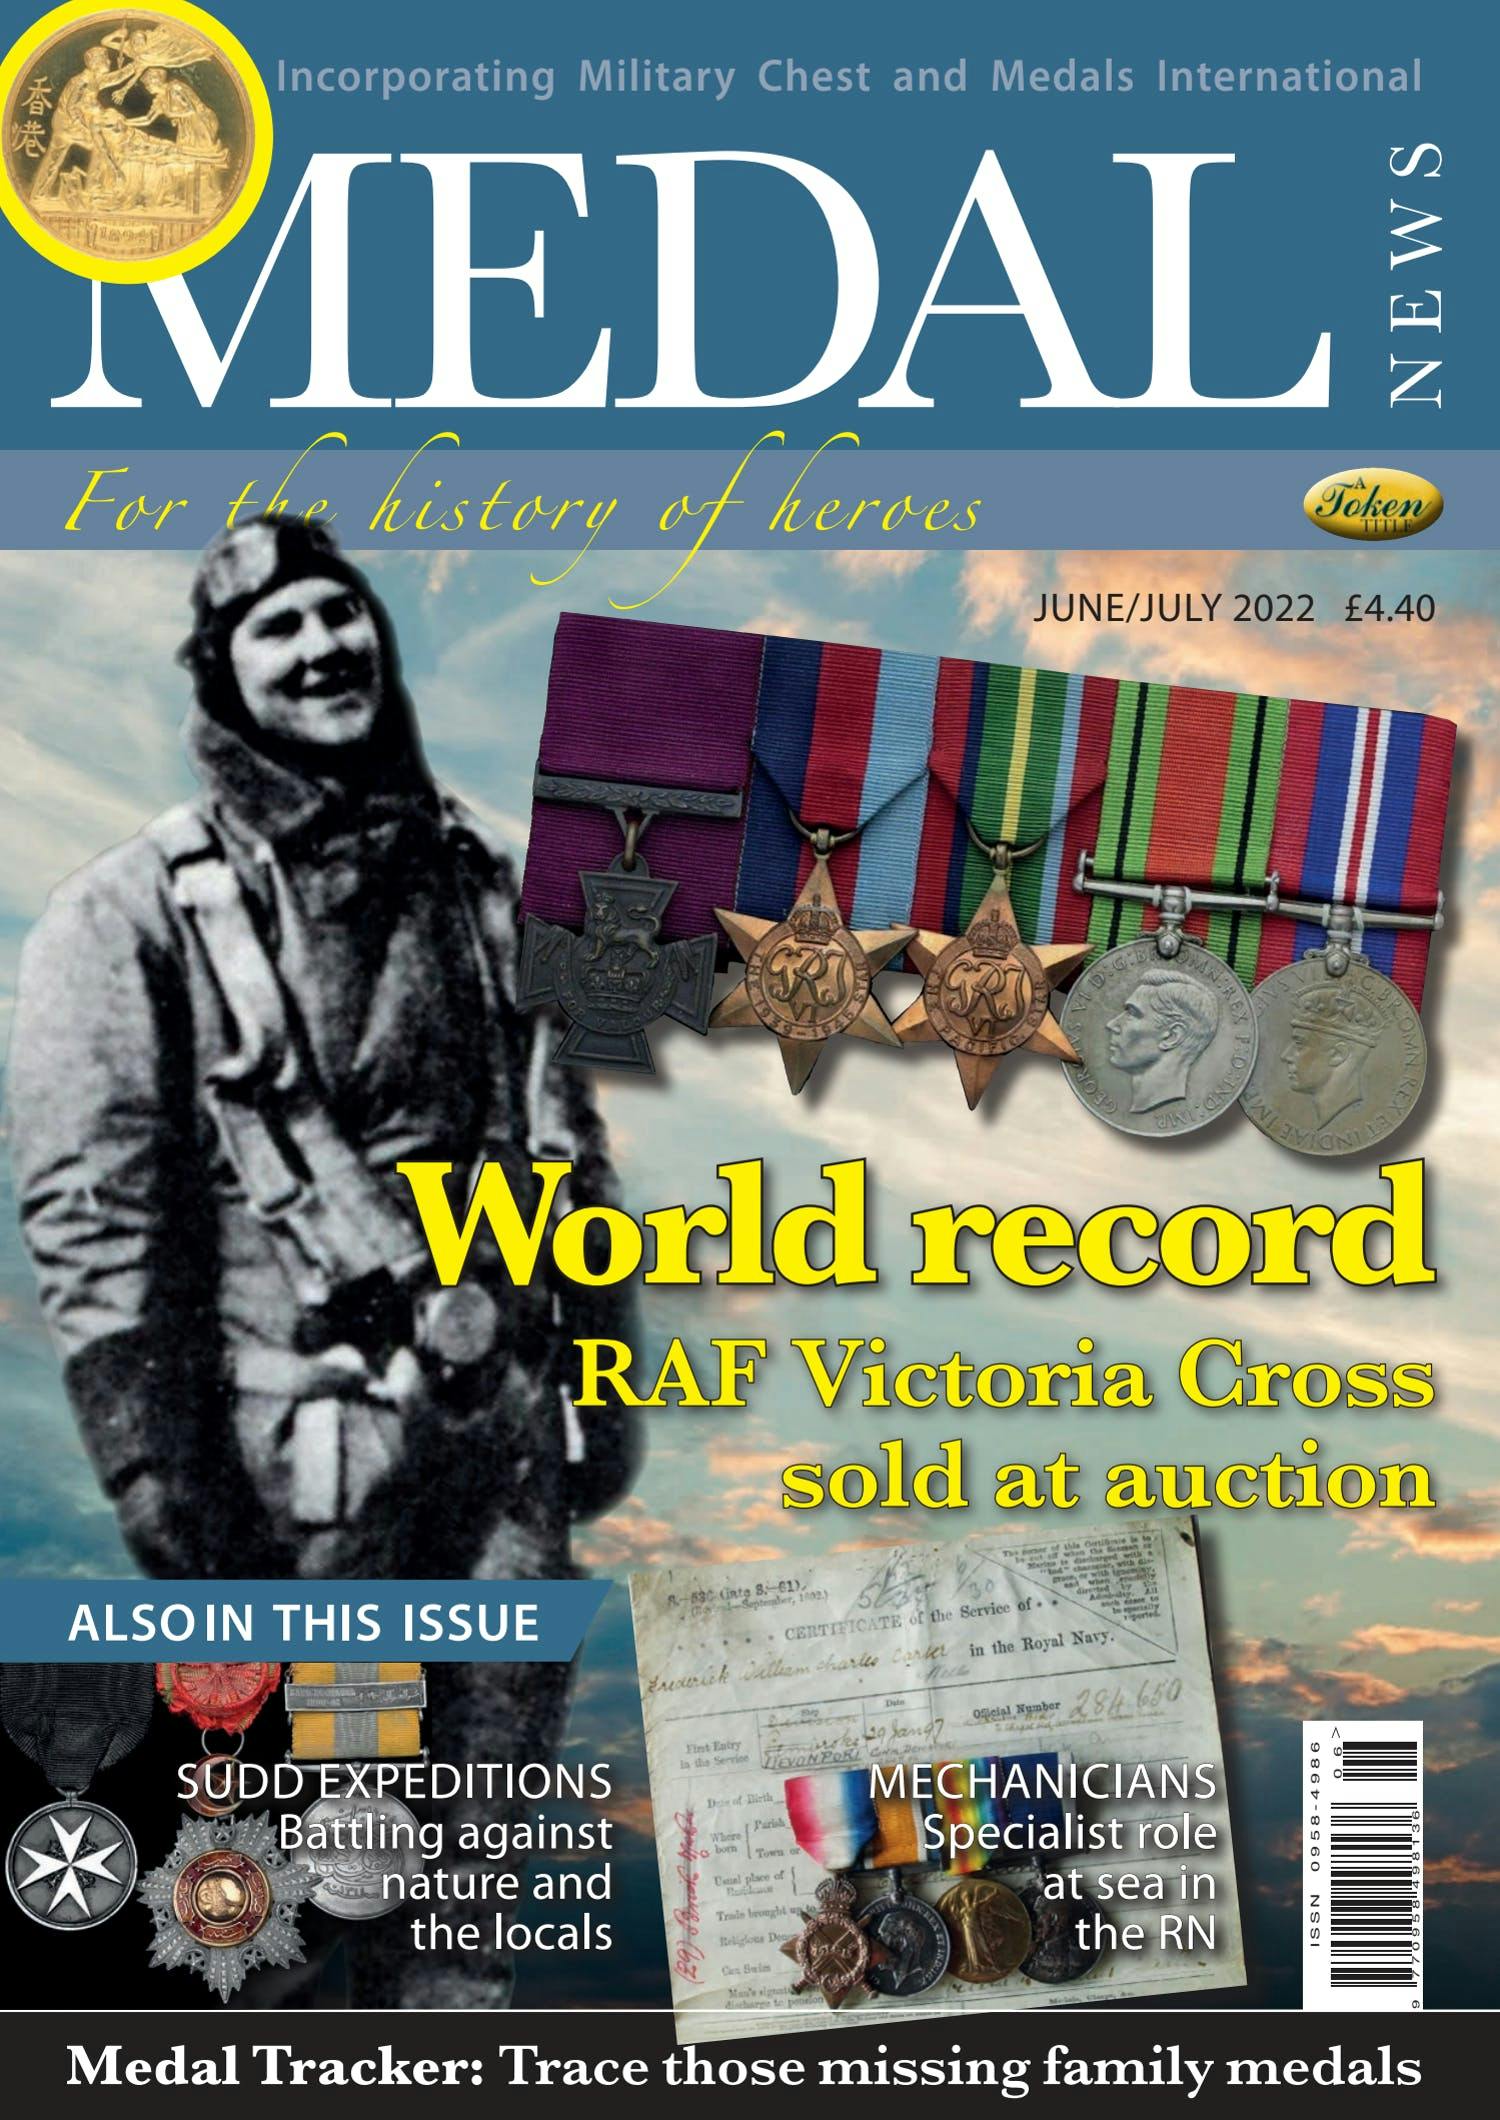 The front cover of Medal News, June 2022 - Volume 60, Number 6